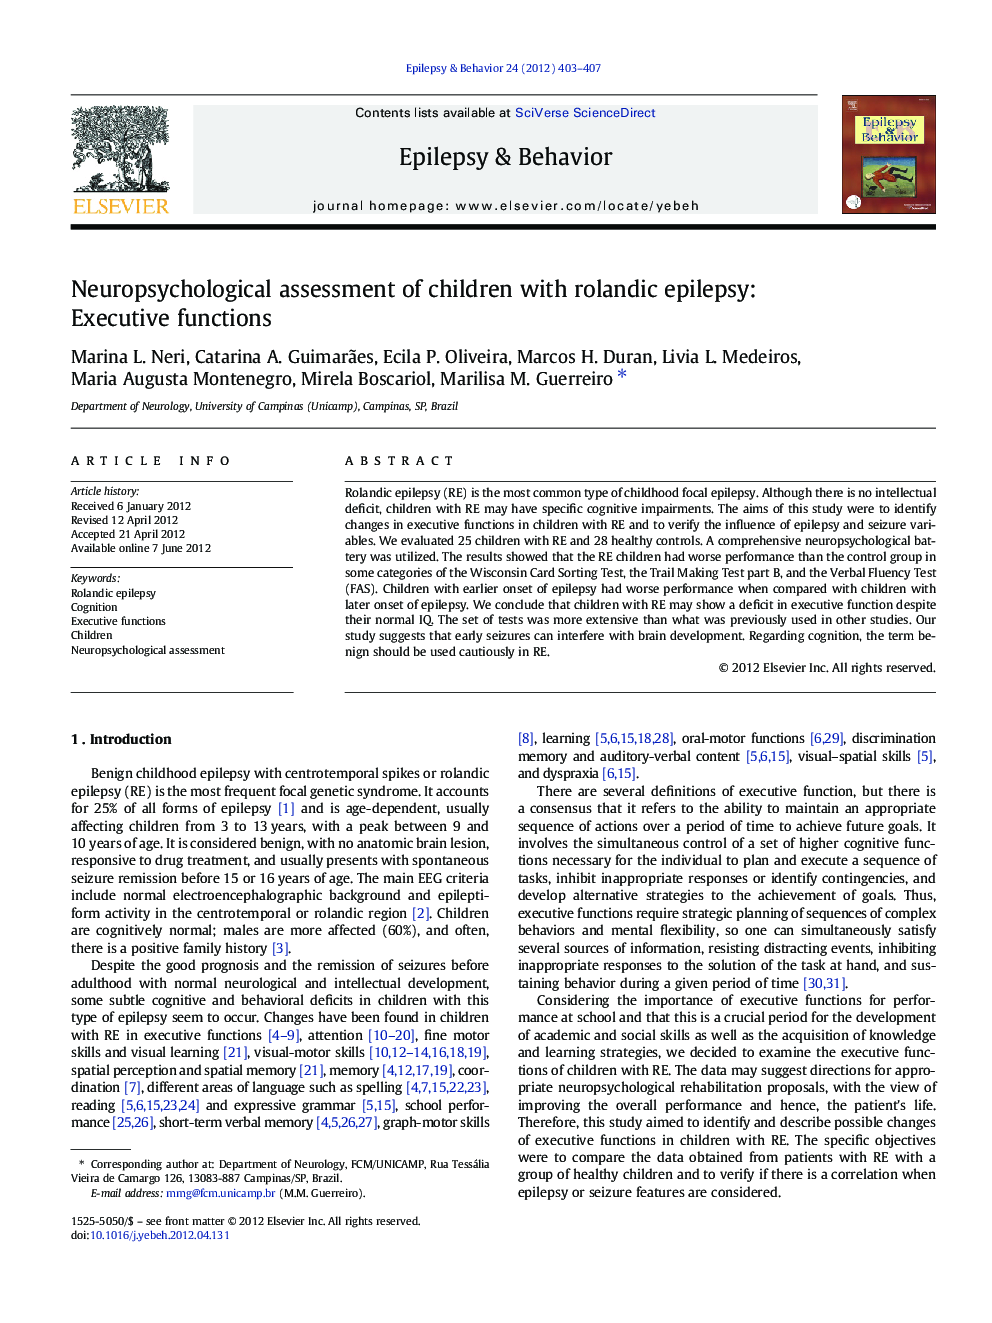 Neuropsychological assessment of children with rolandic epilepsy: Executive functions